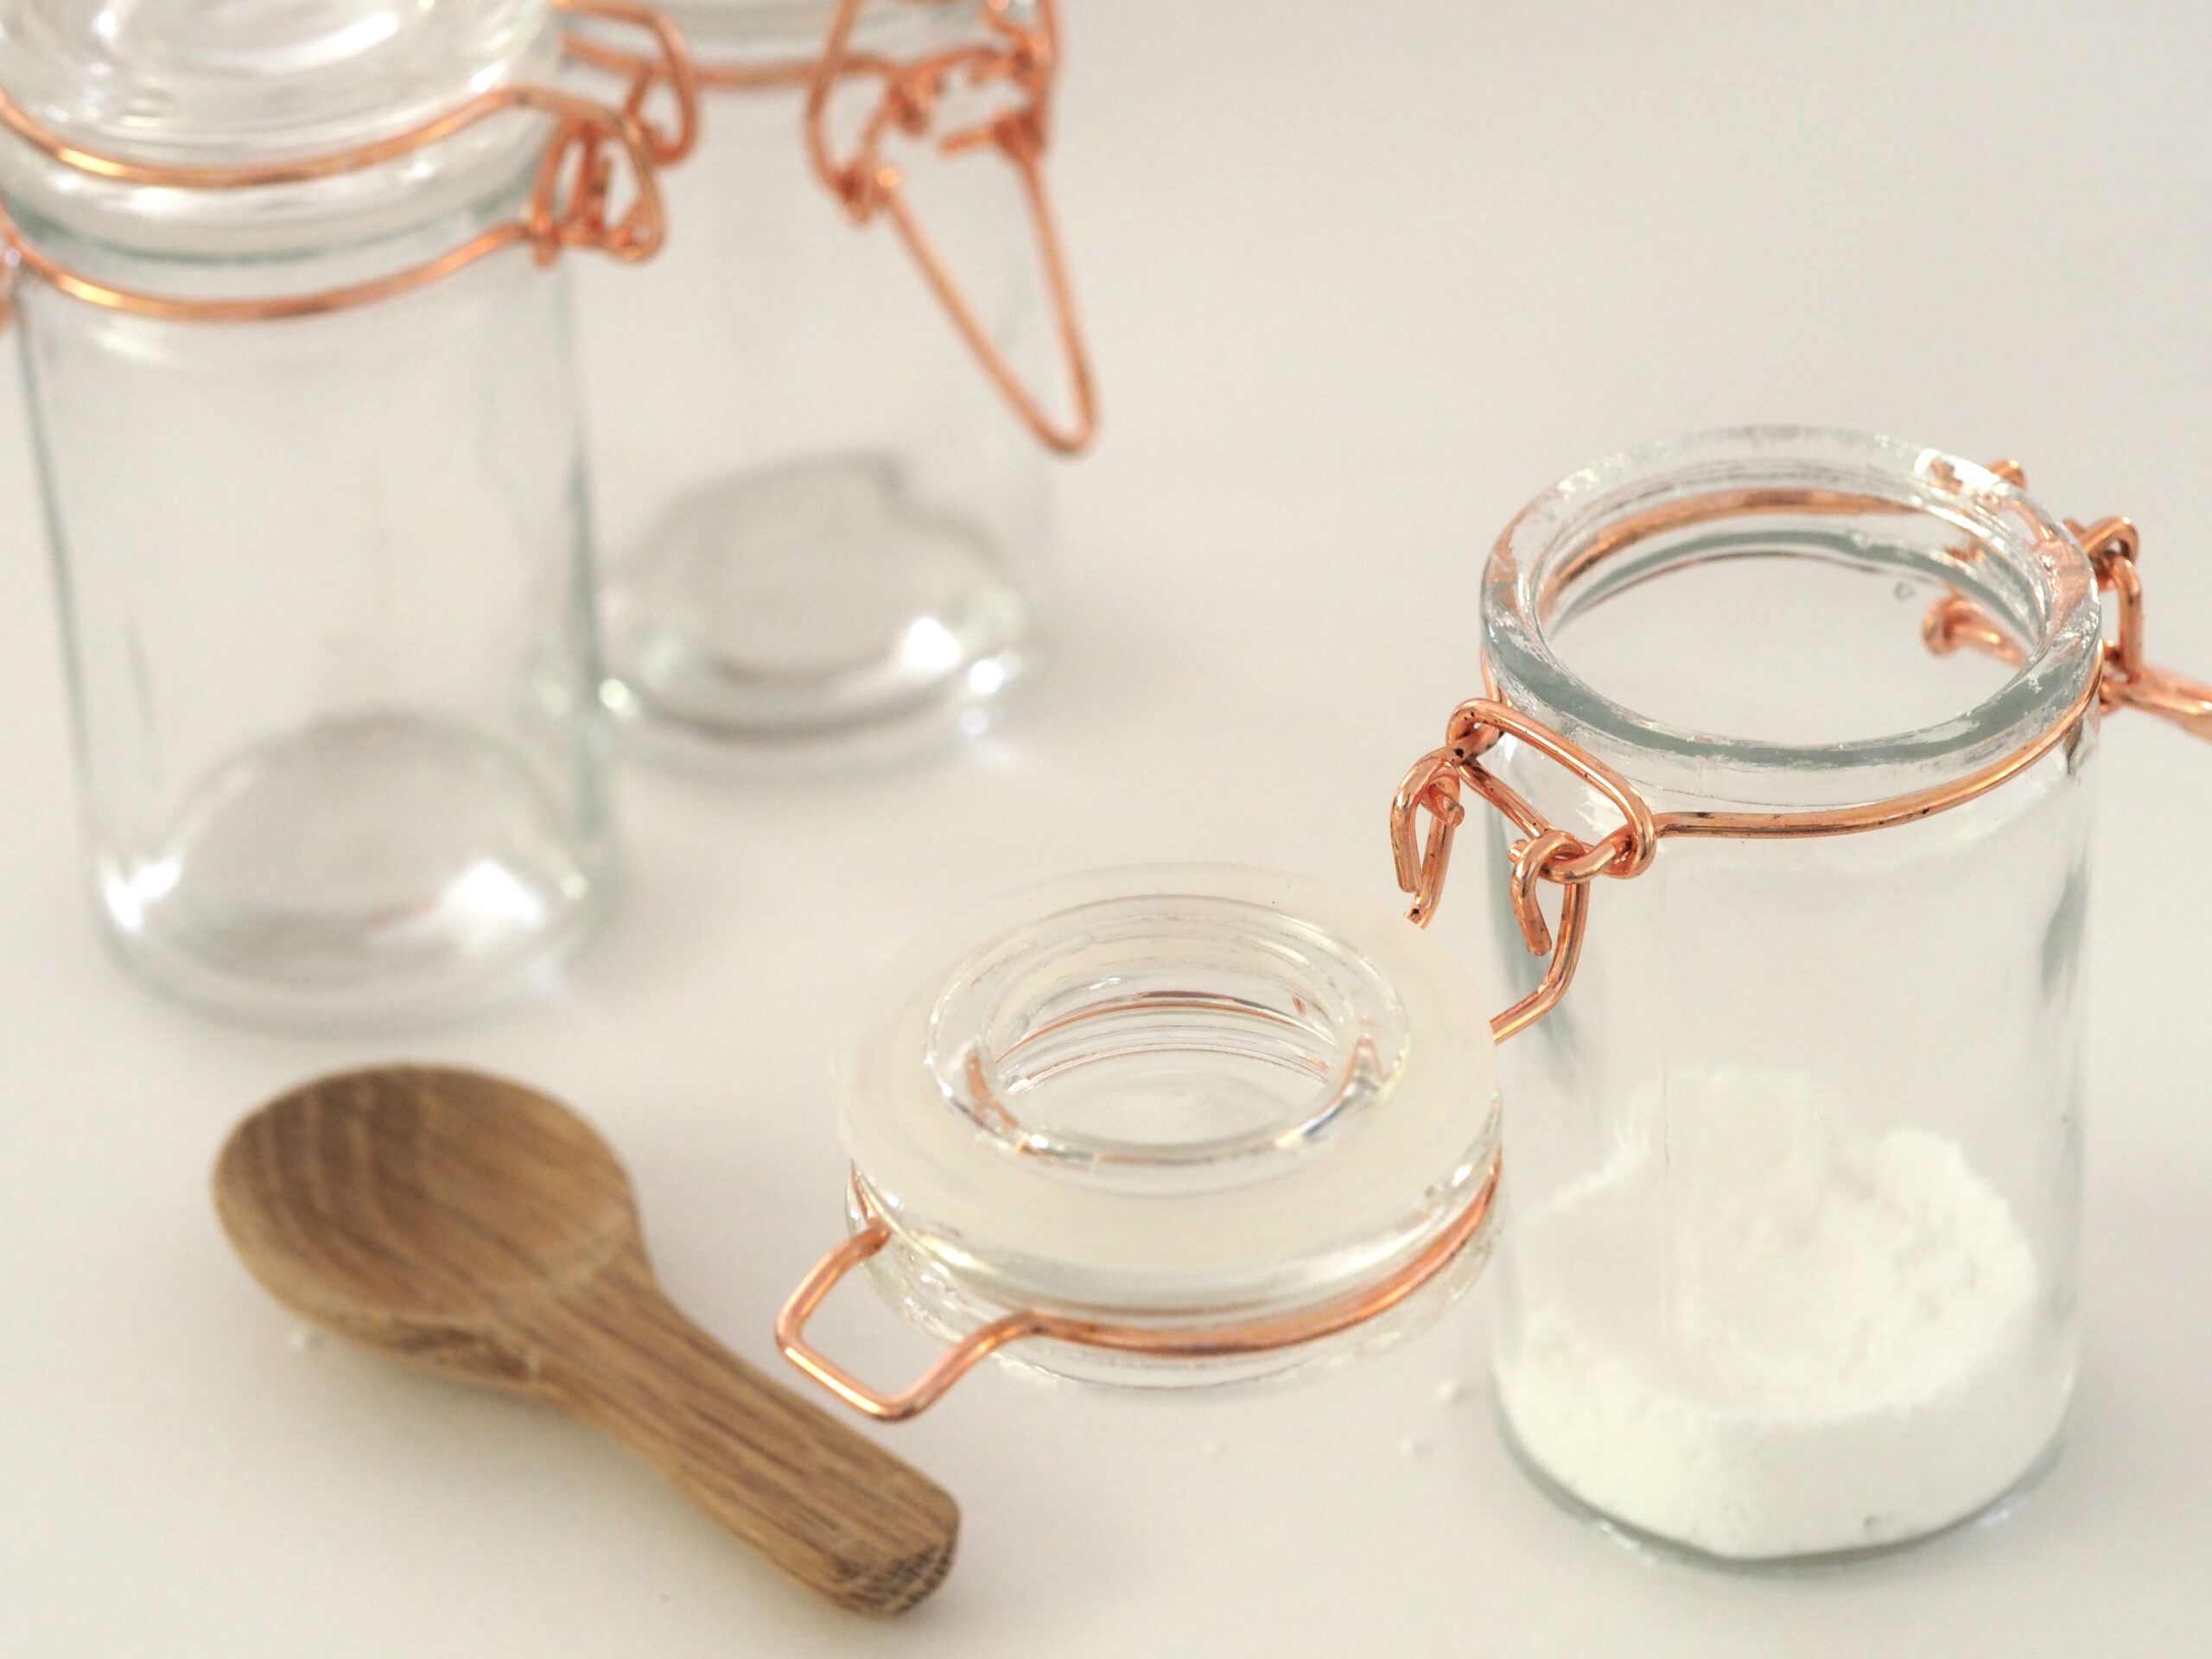 one empty glass jar one with flour in and a wooden spoon.